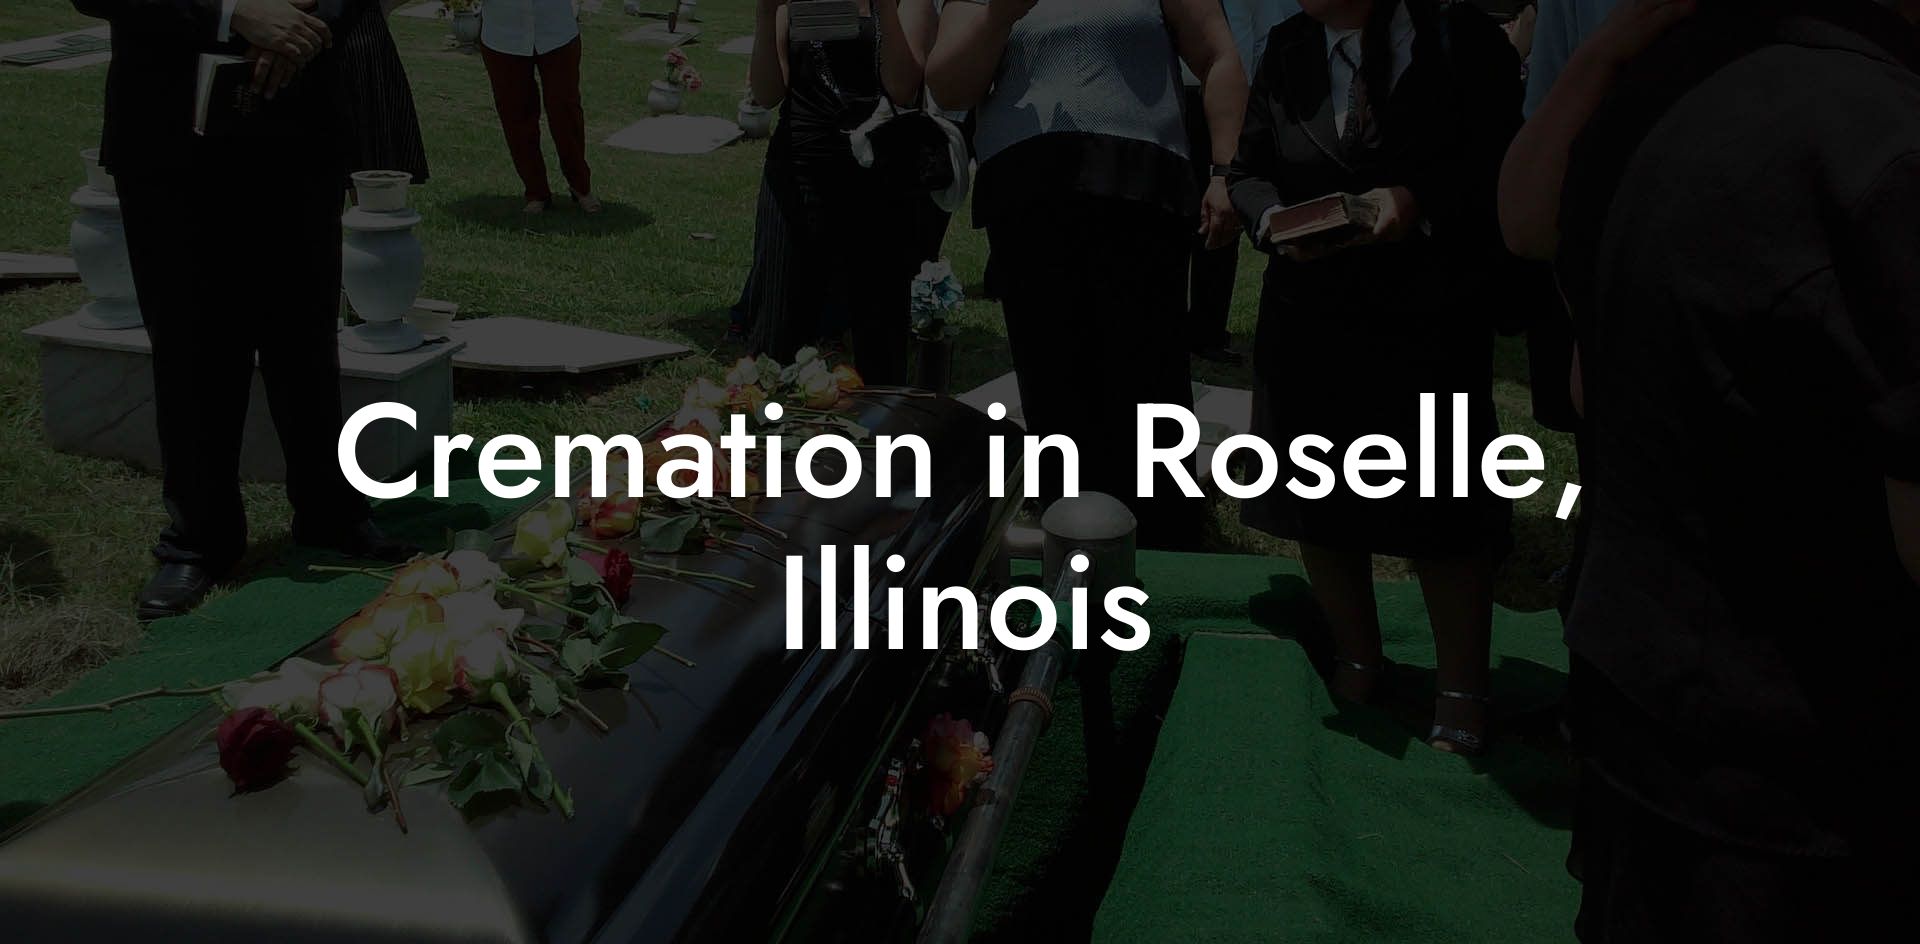 Cremation in Roselle, Illinois